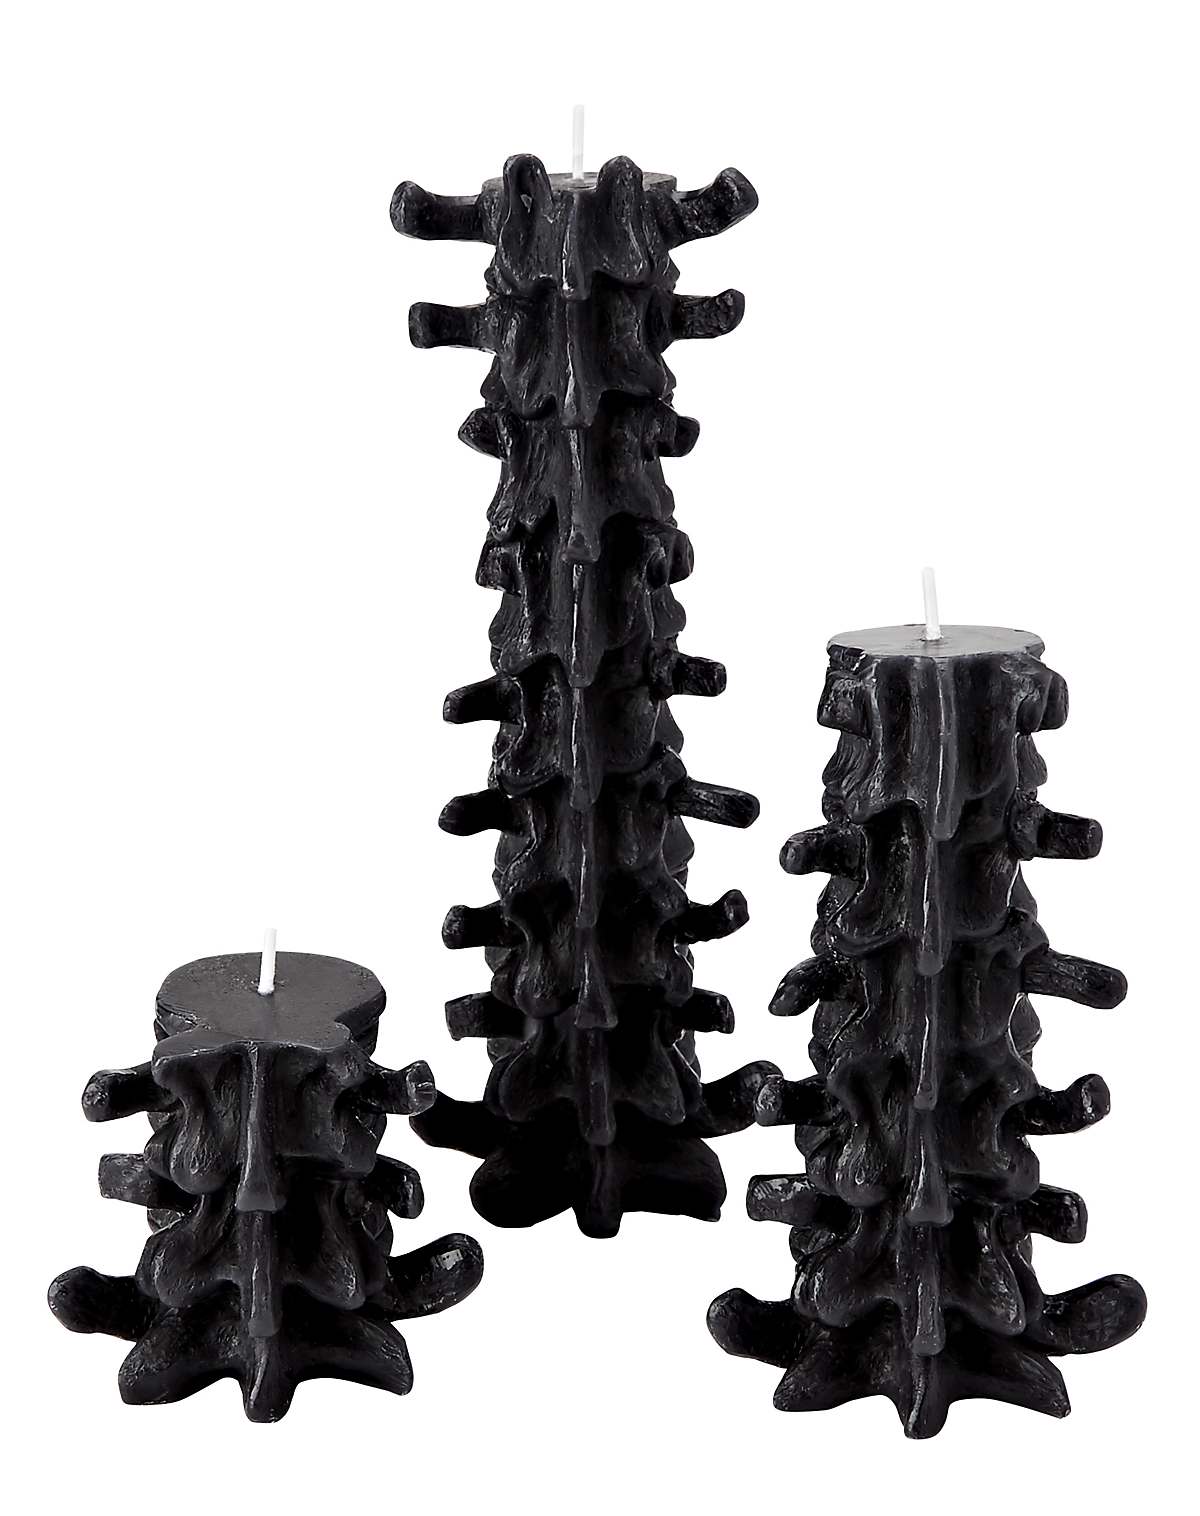 Black Gothic spine candles